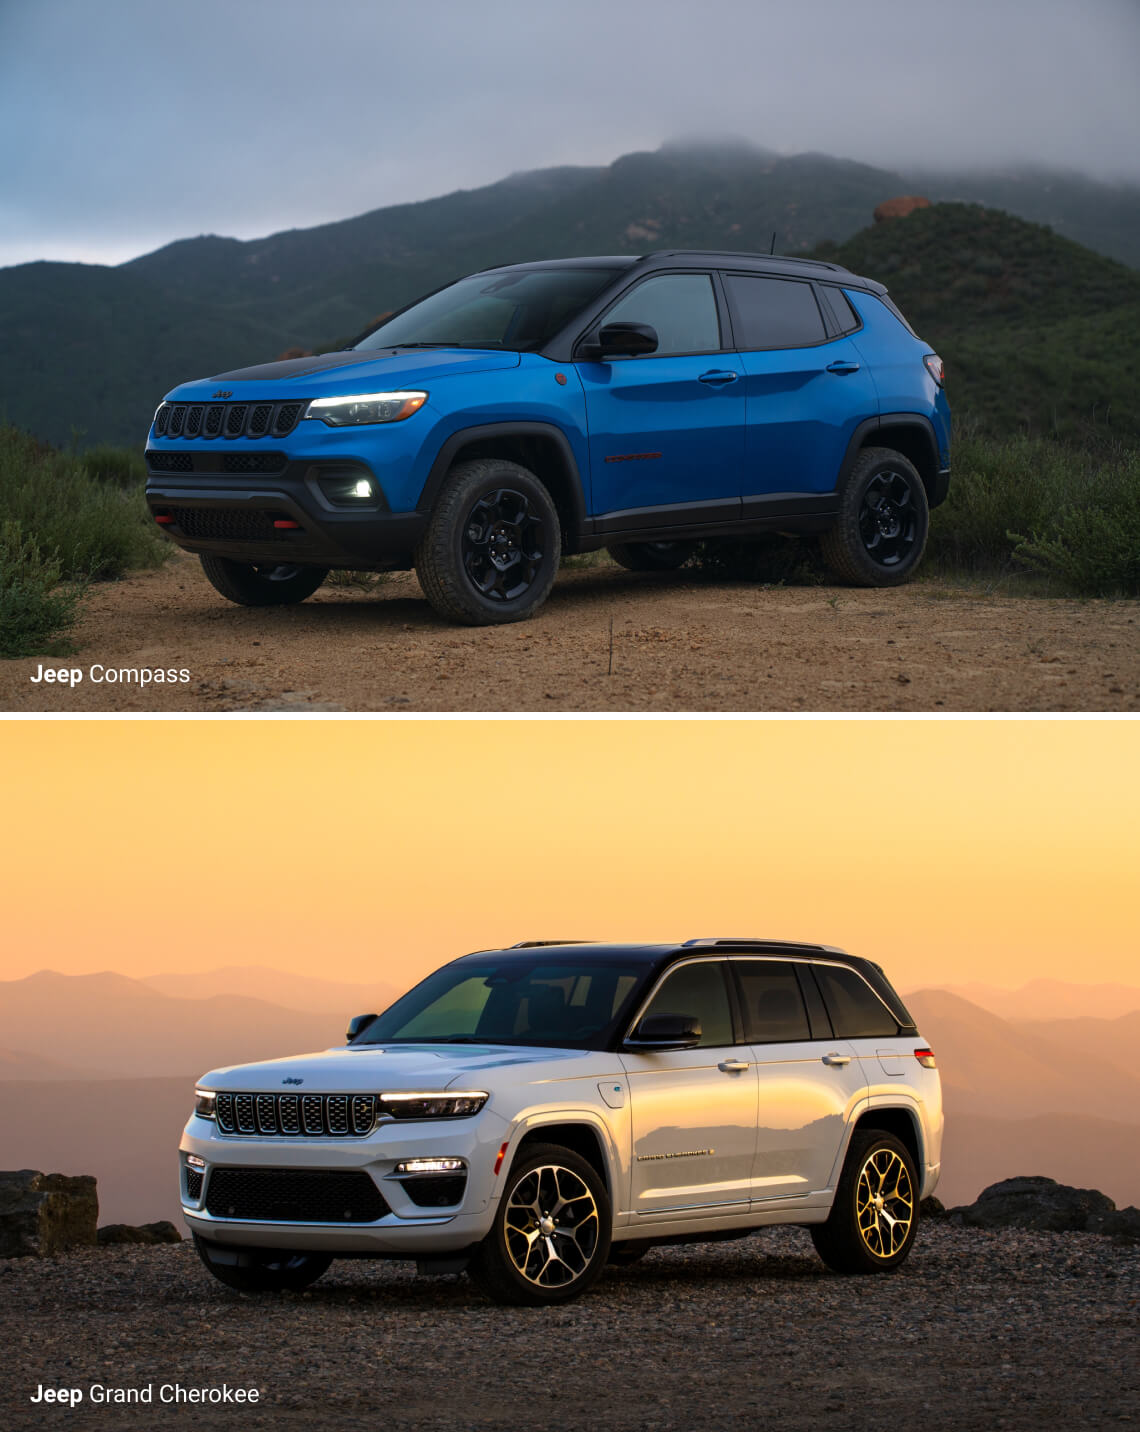 What Compass and Grand Cherokee Trims Are Available?